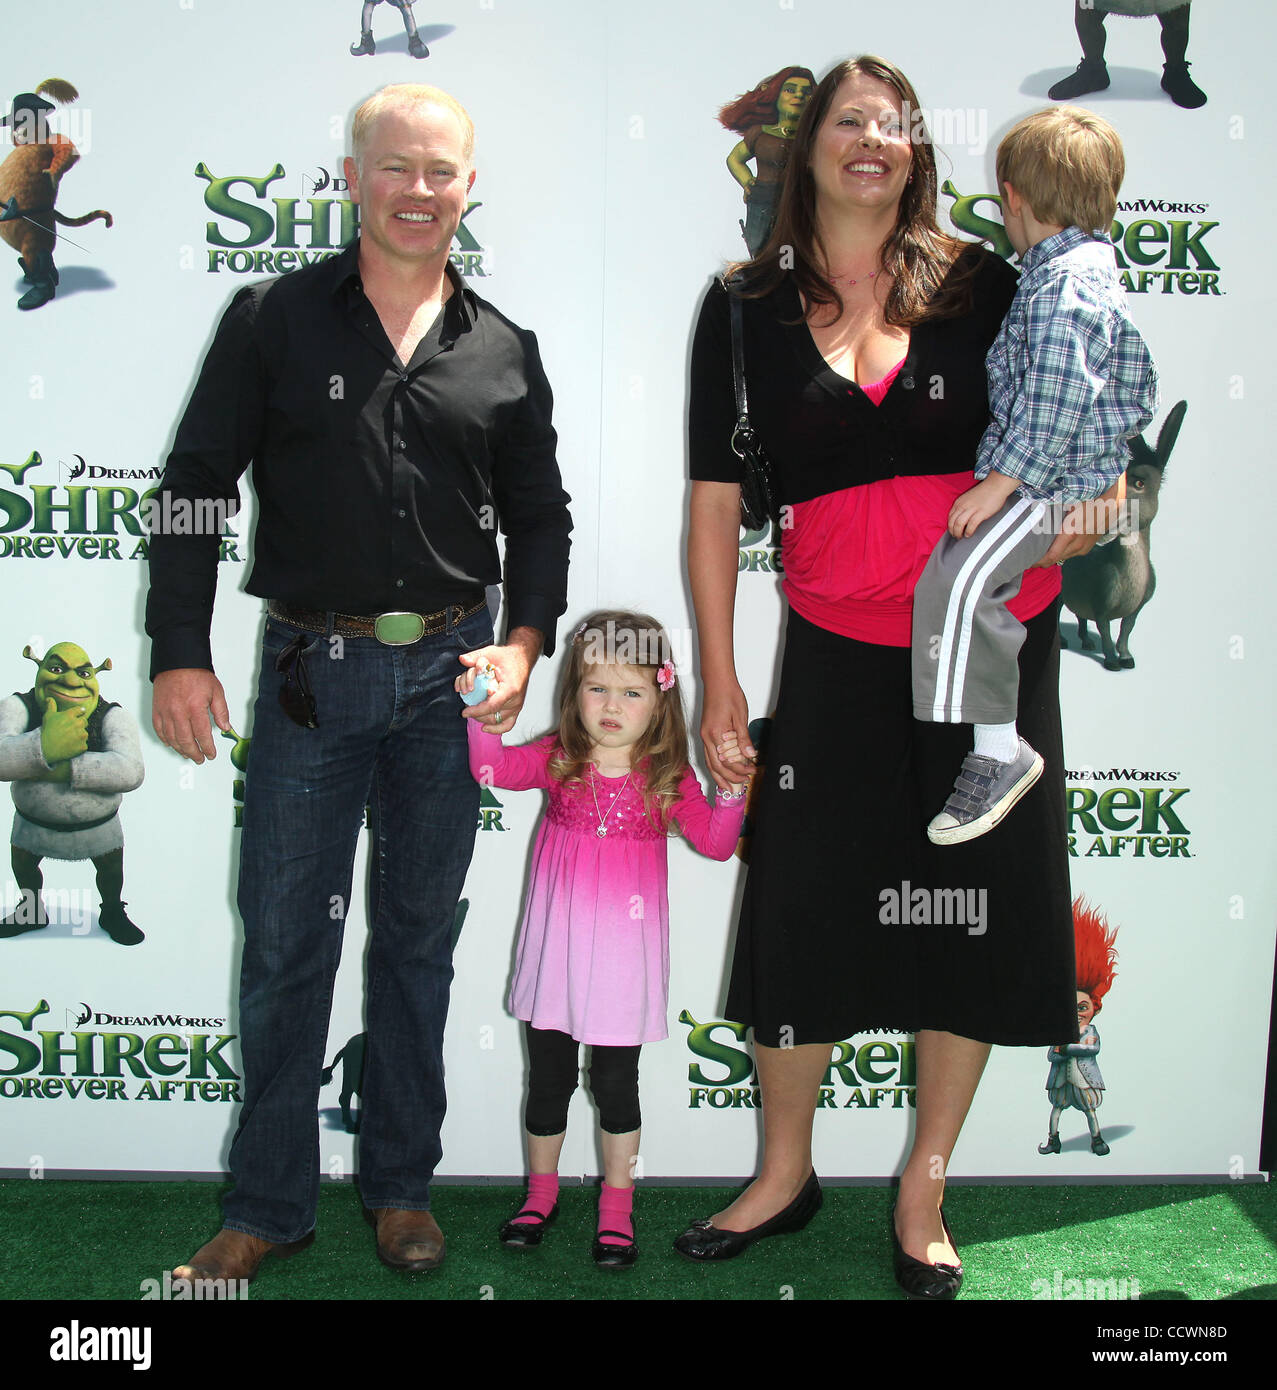 May 16, 2010 - Universal City, California, USA - Actor NEAL MCDONOUGH & FAMILY arriving to the 'Shrek Forever After' Los Angeles Premiere held at the Gibson Amphitheatre. (Credit Image: © Lisa O'Connor/ZUMA Press) Stock Photo